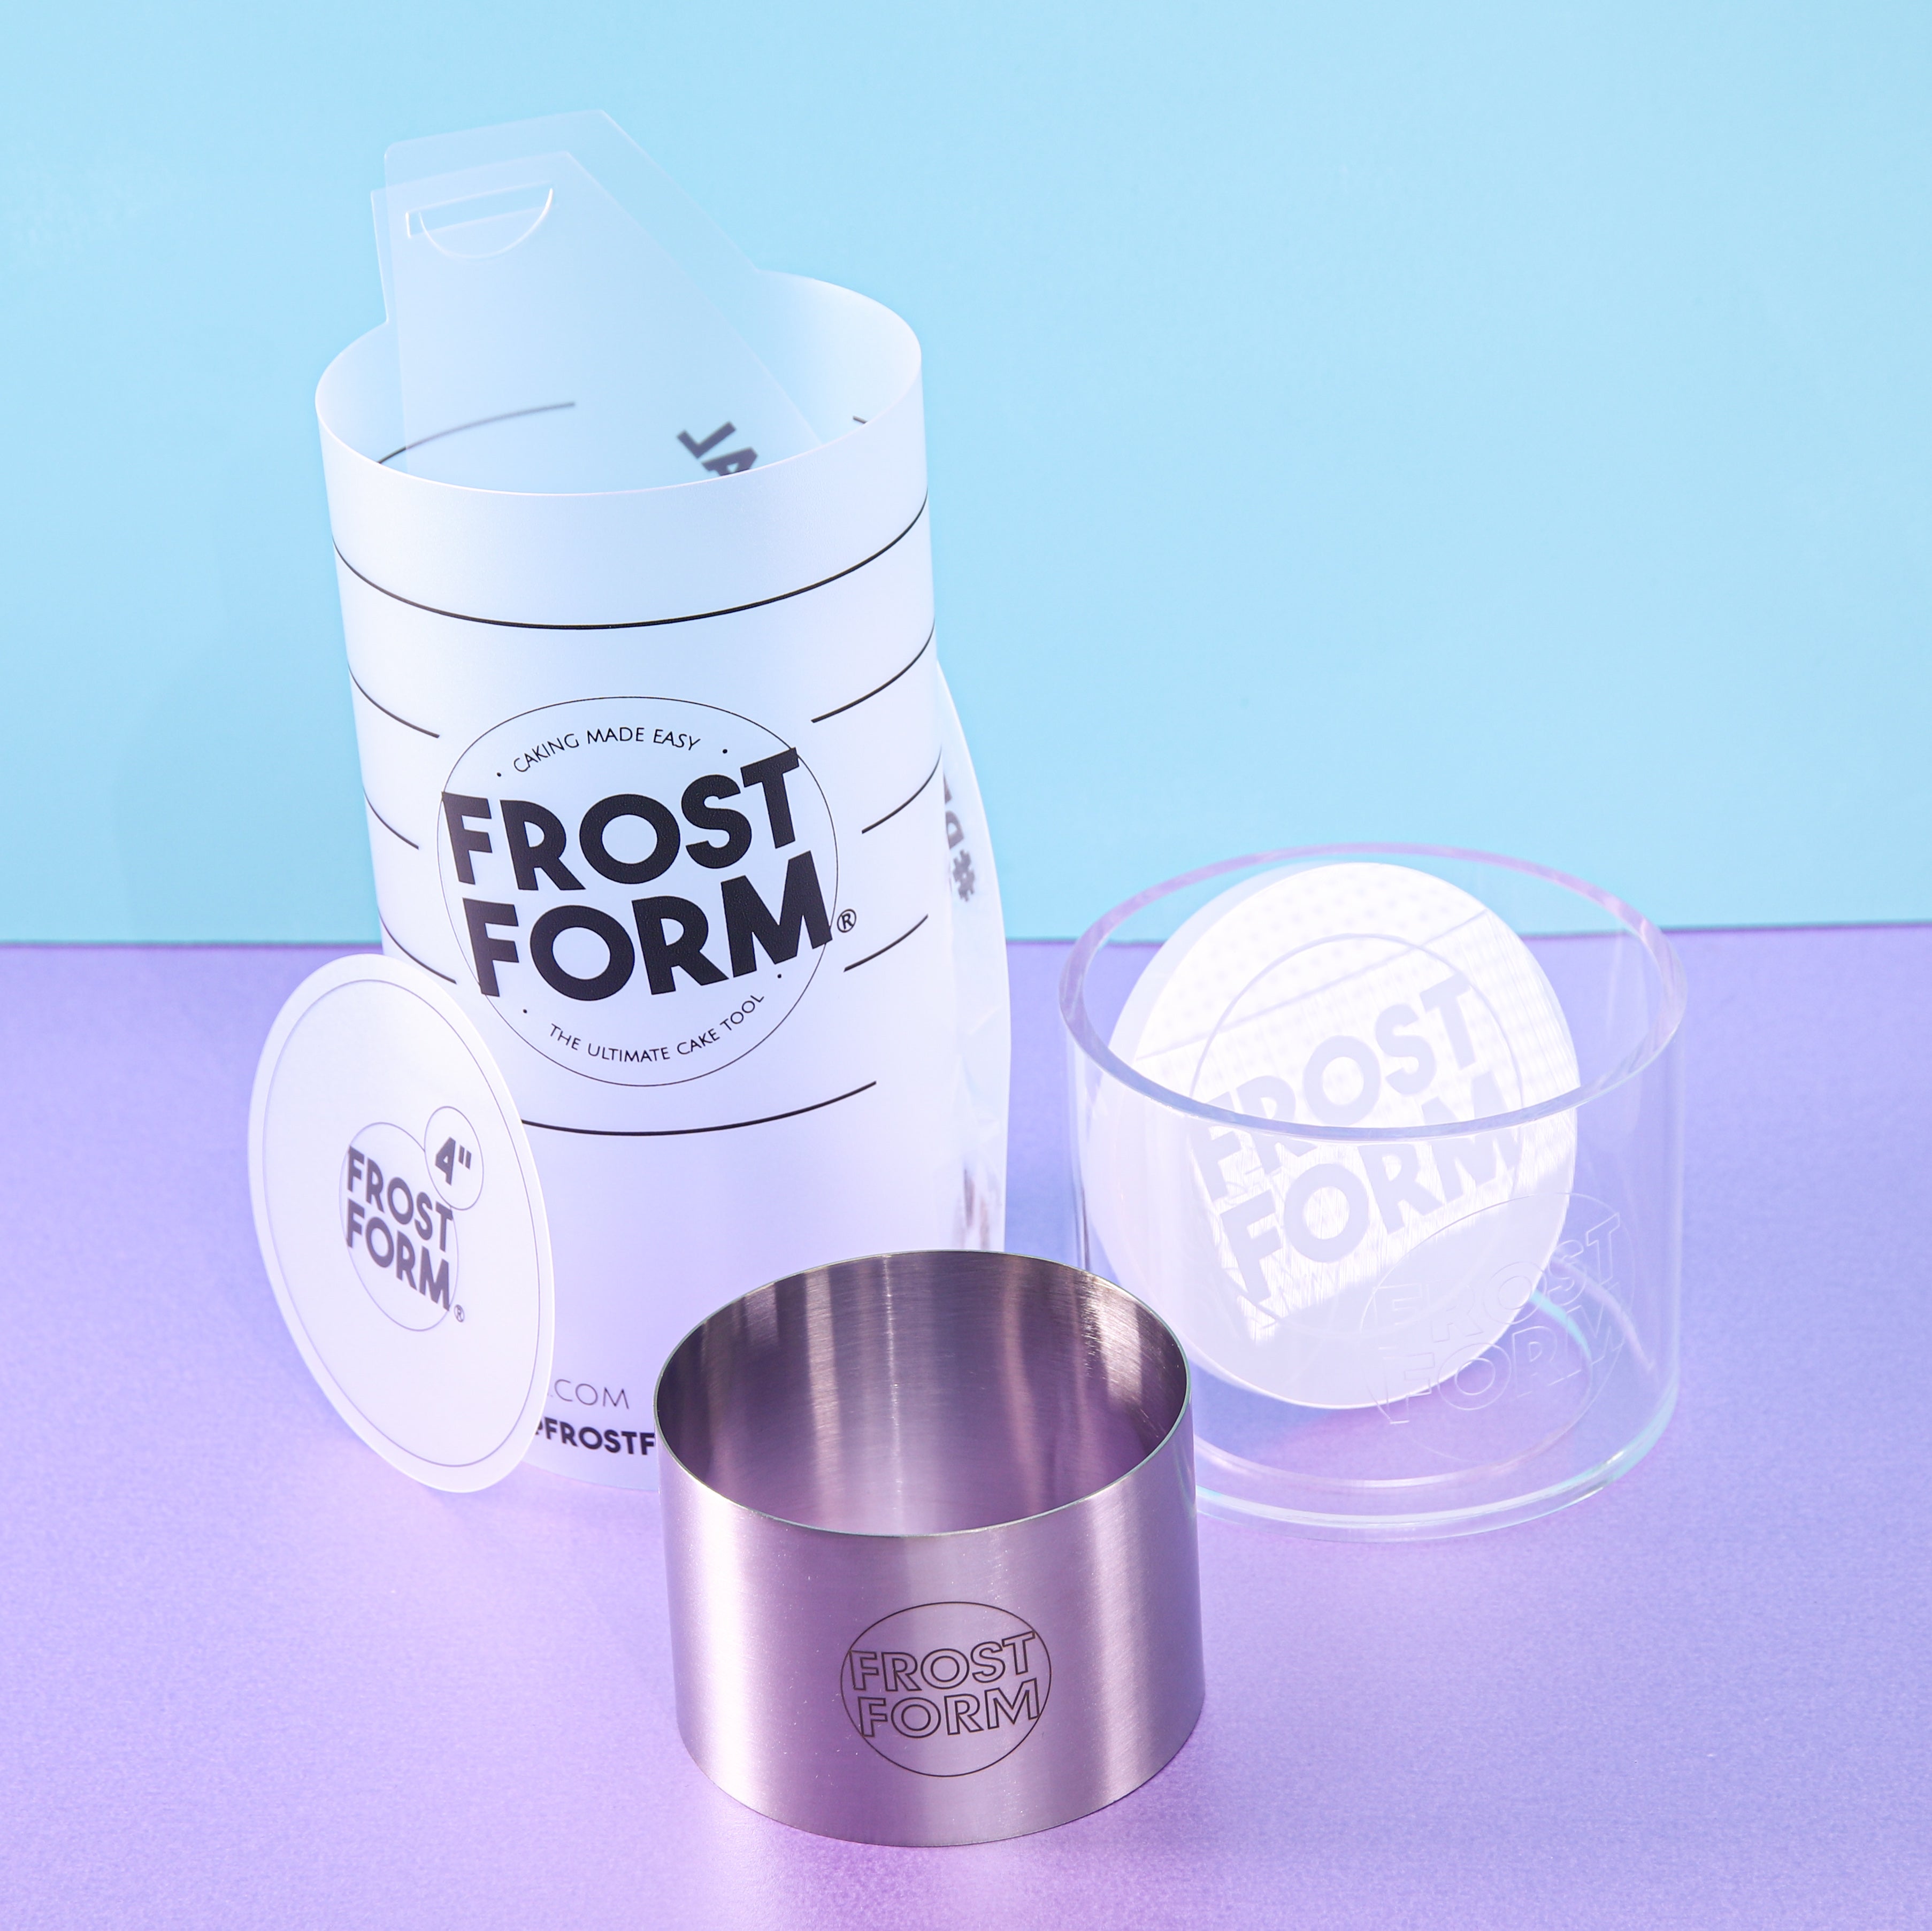 Frost Form- The Round Kit - Tools & Equipment from Cake Craft